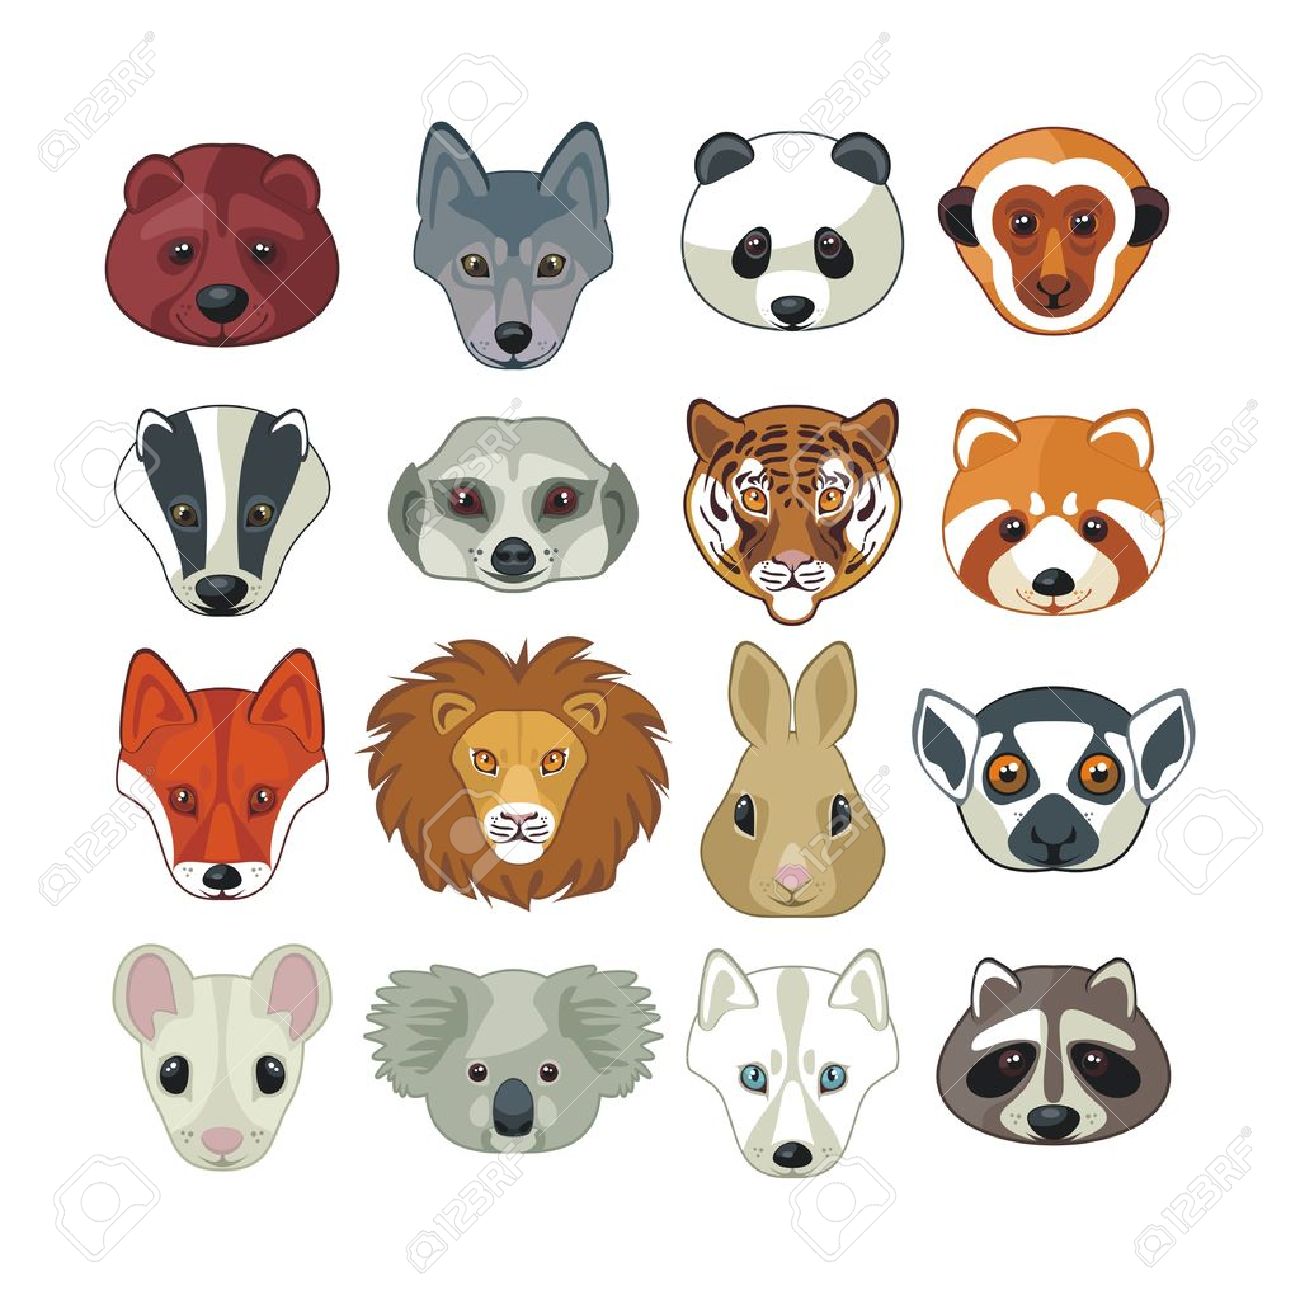 Badger clipart animal character. Head pencil and in